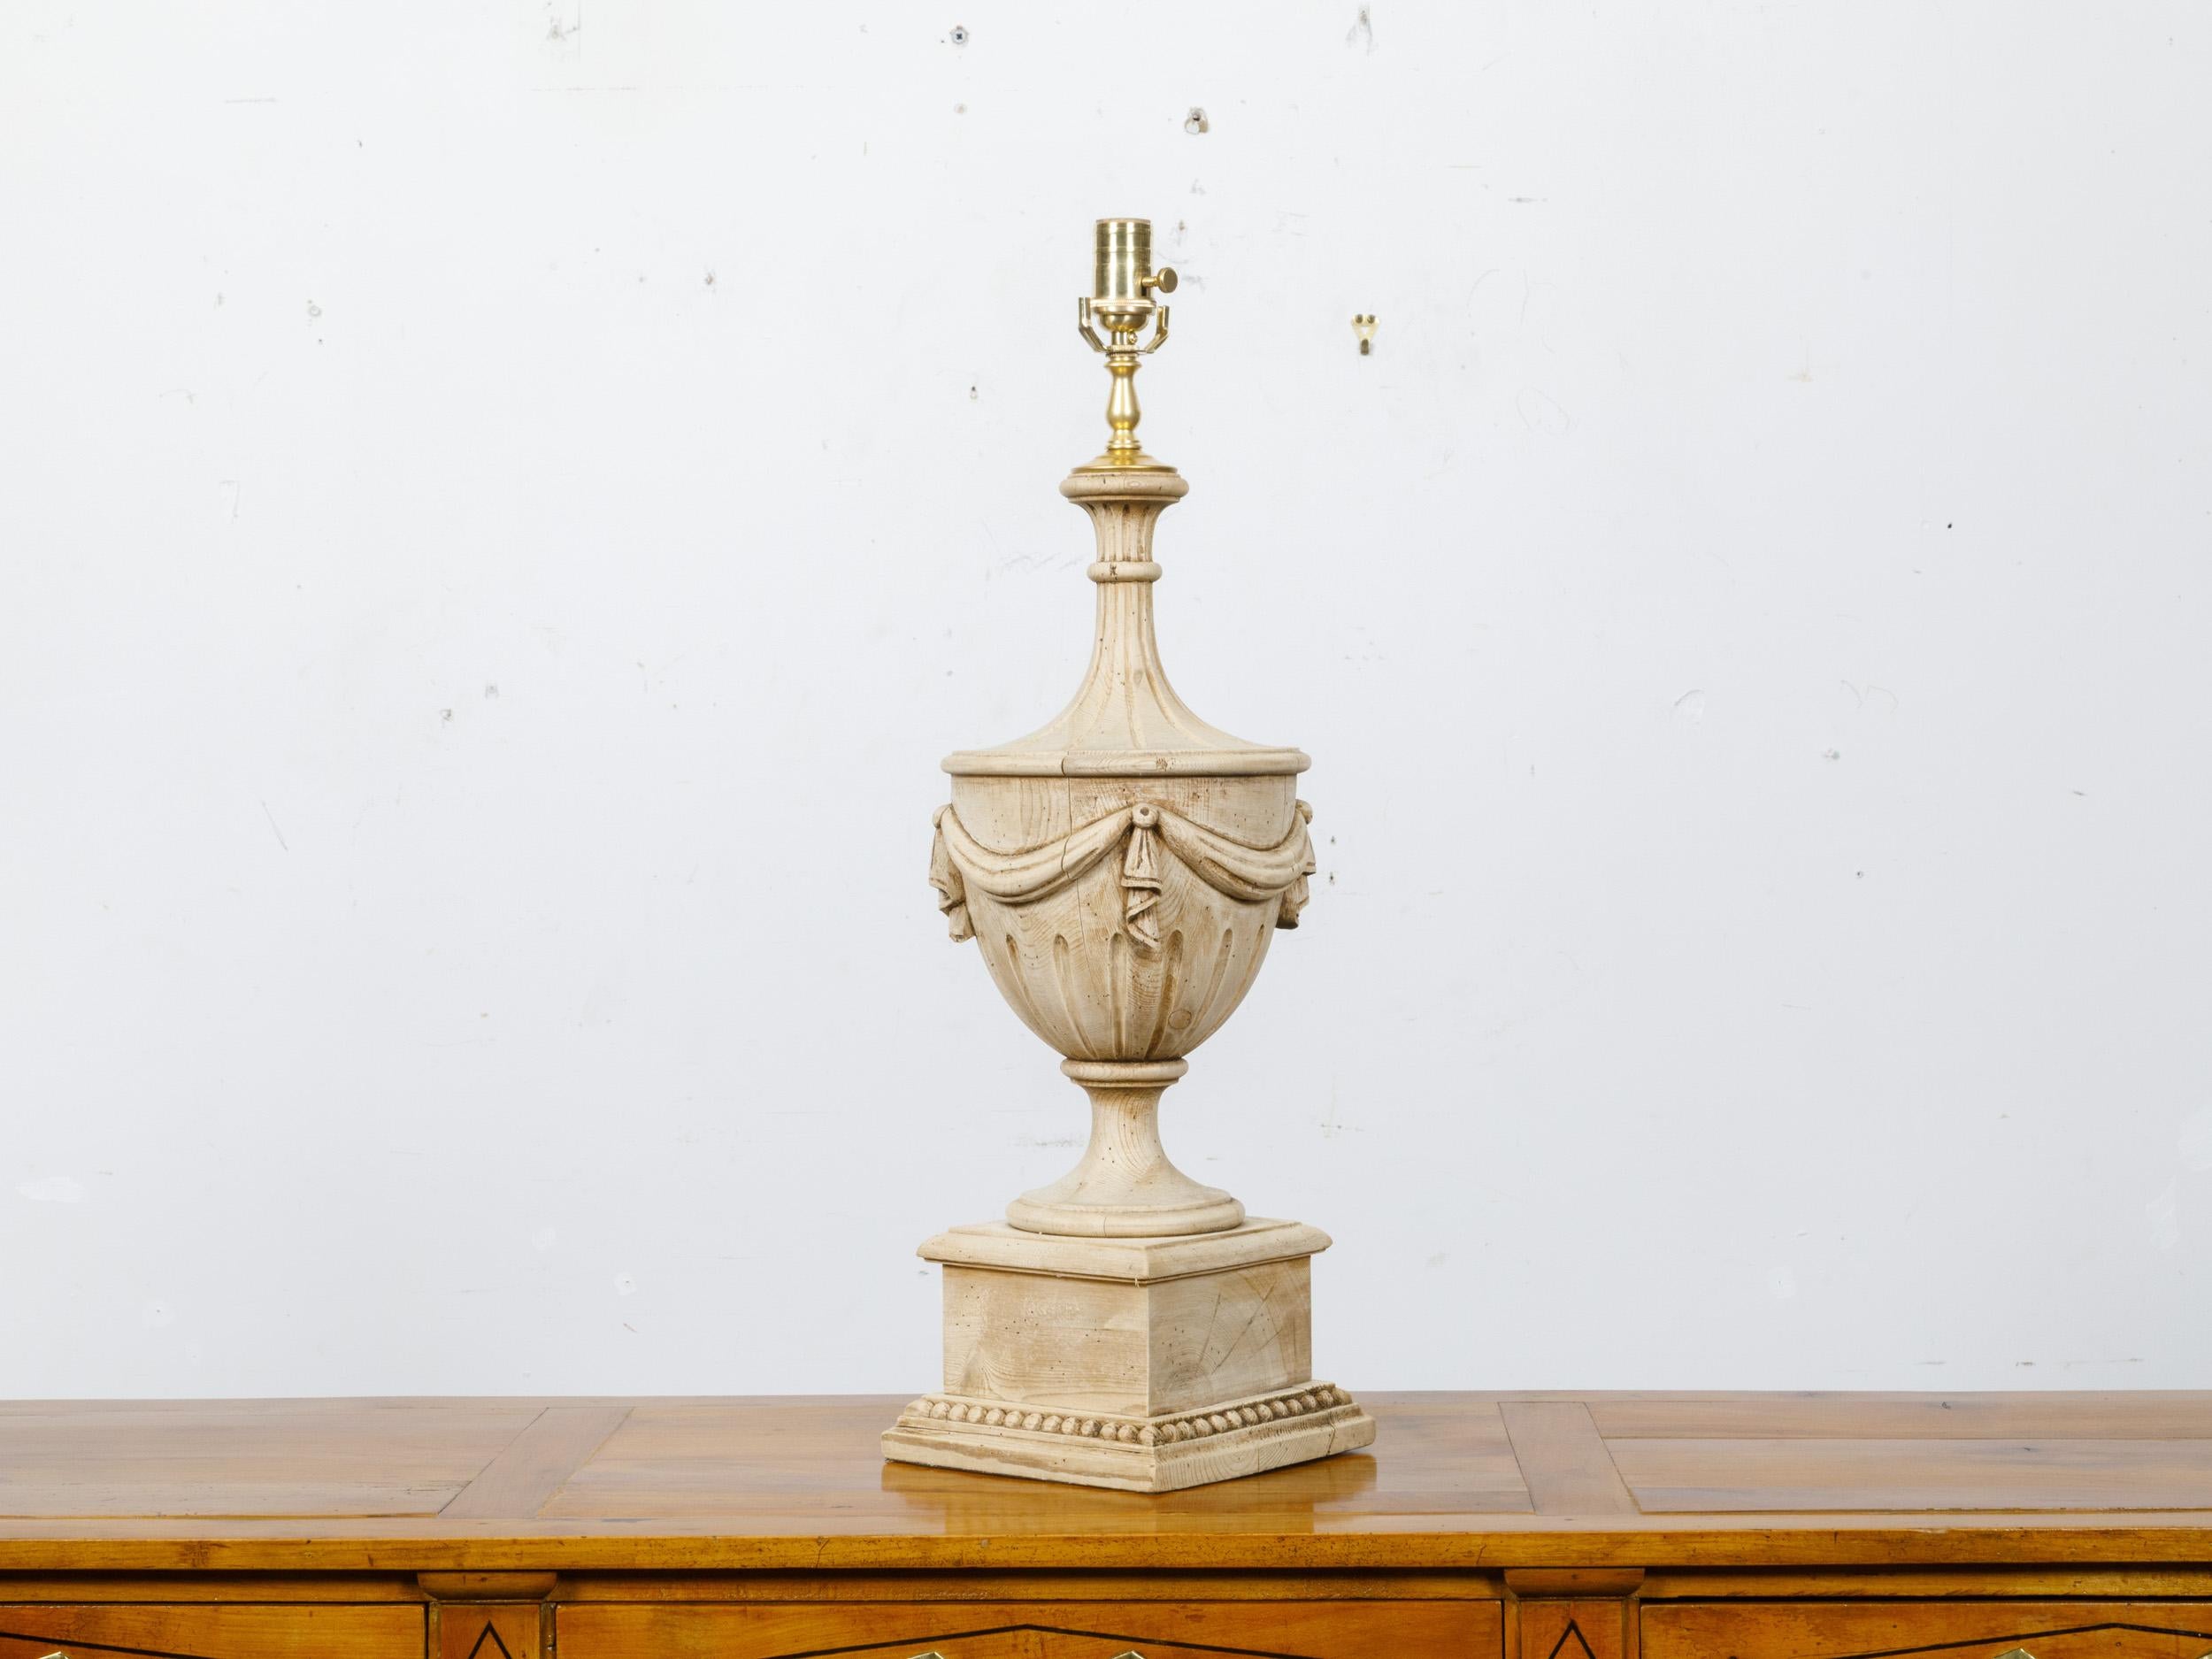 A 19th century Neoclassical carved pine urn form finial with swag motif, made into a table lamp wired for the USA. This exquisite table lamp artfully repurposes a 19th-century Neoclassical pine finial, offering a unique blend of historical